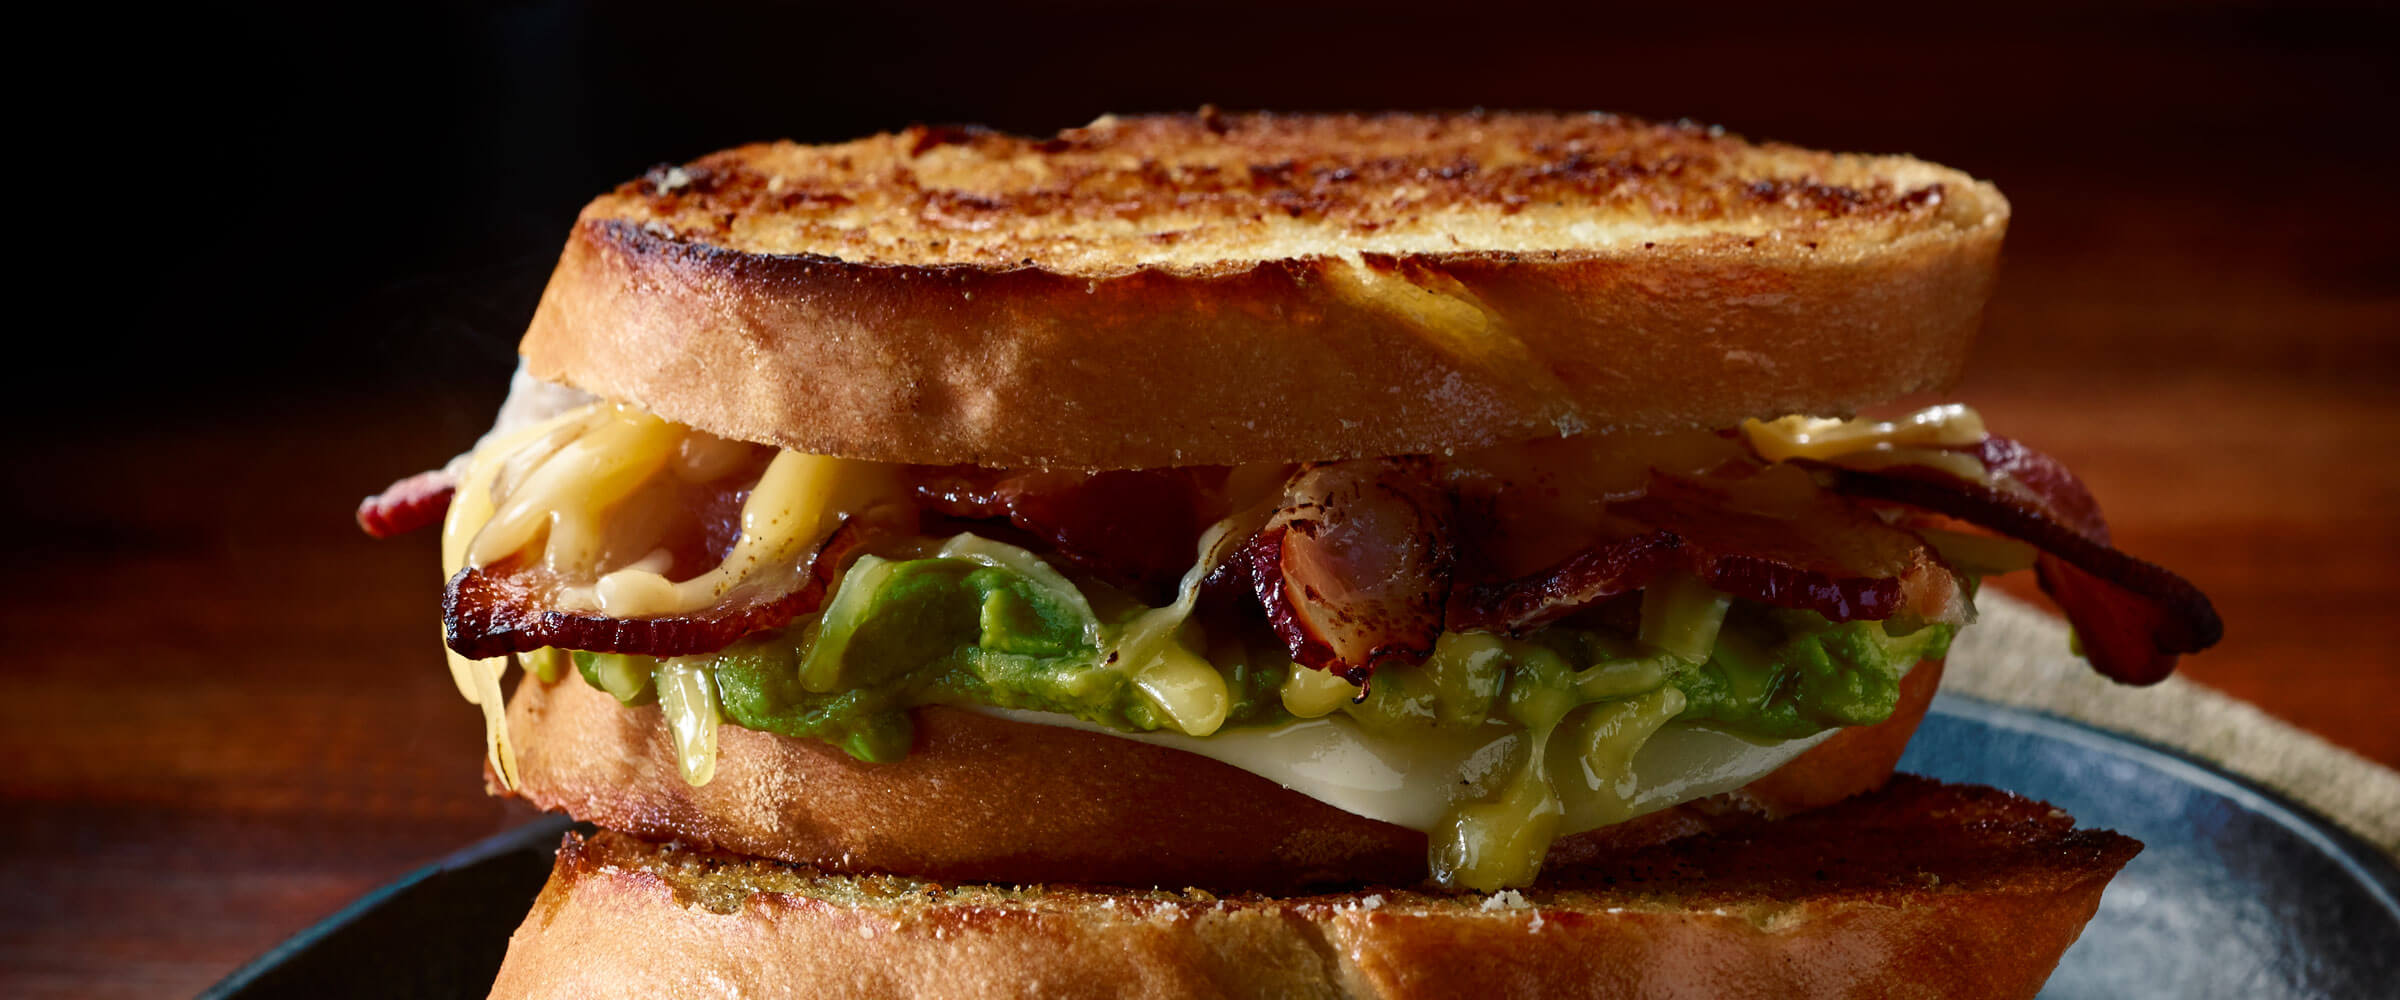 Grilled Cheese, Bacon and Guacamole Sandwich on black plate